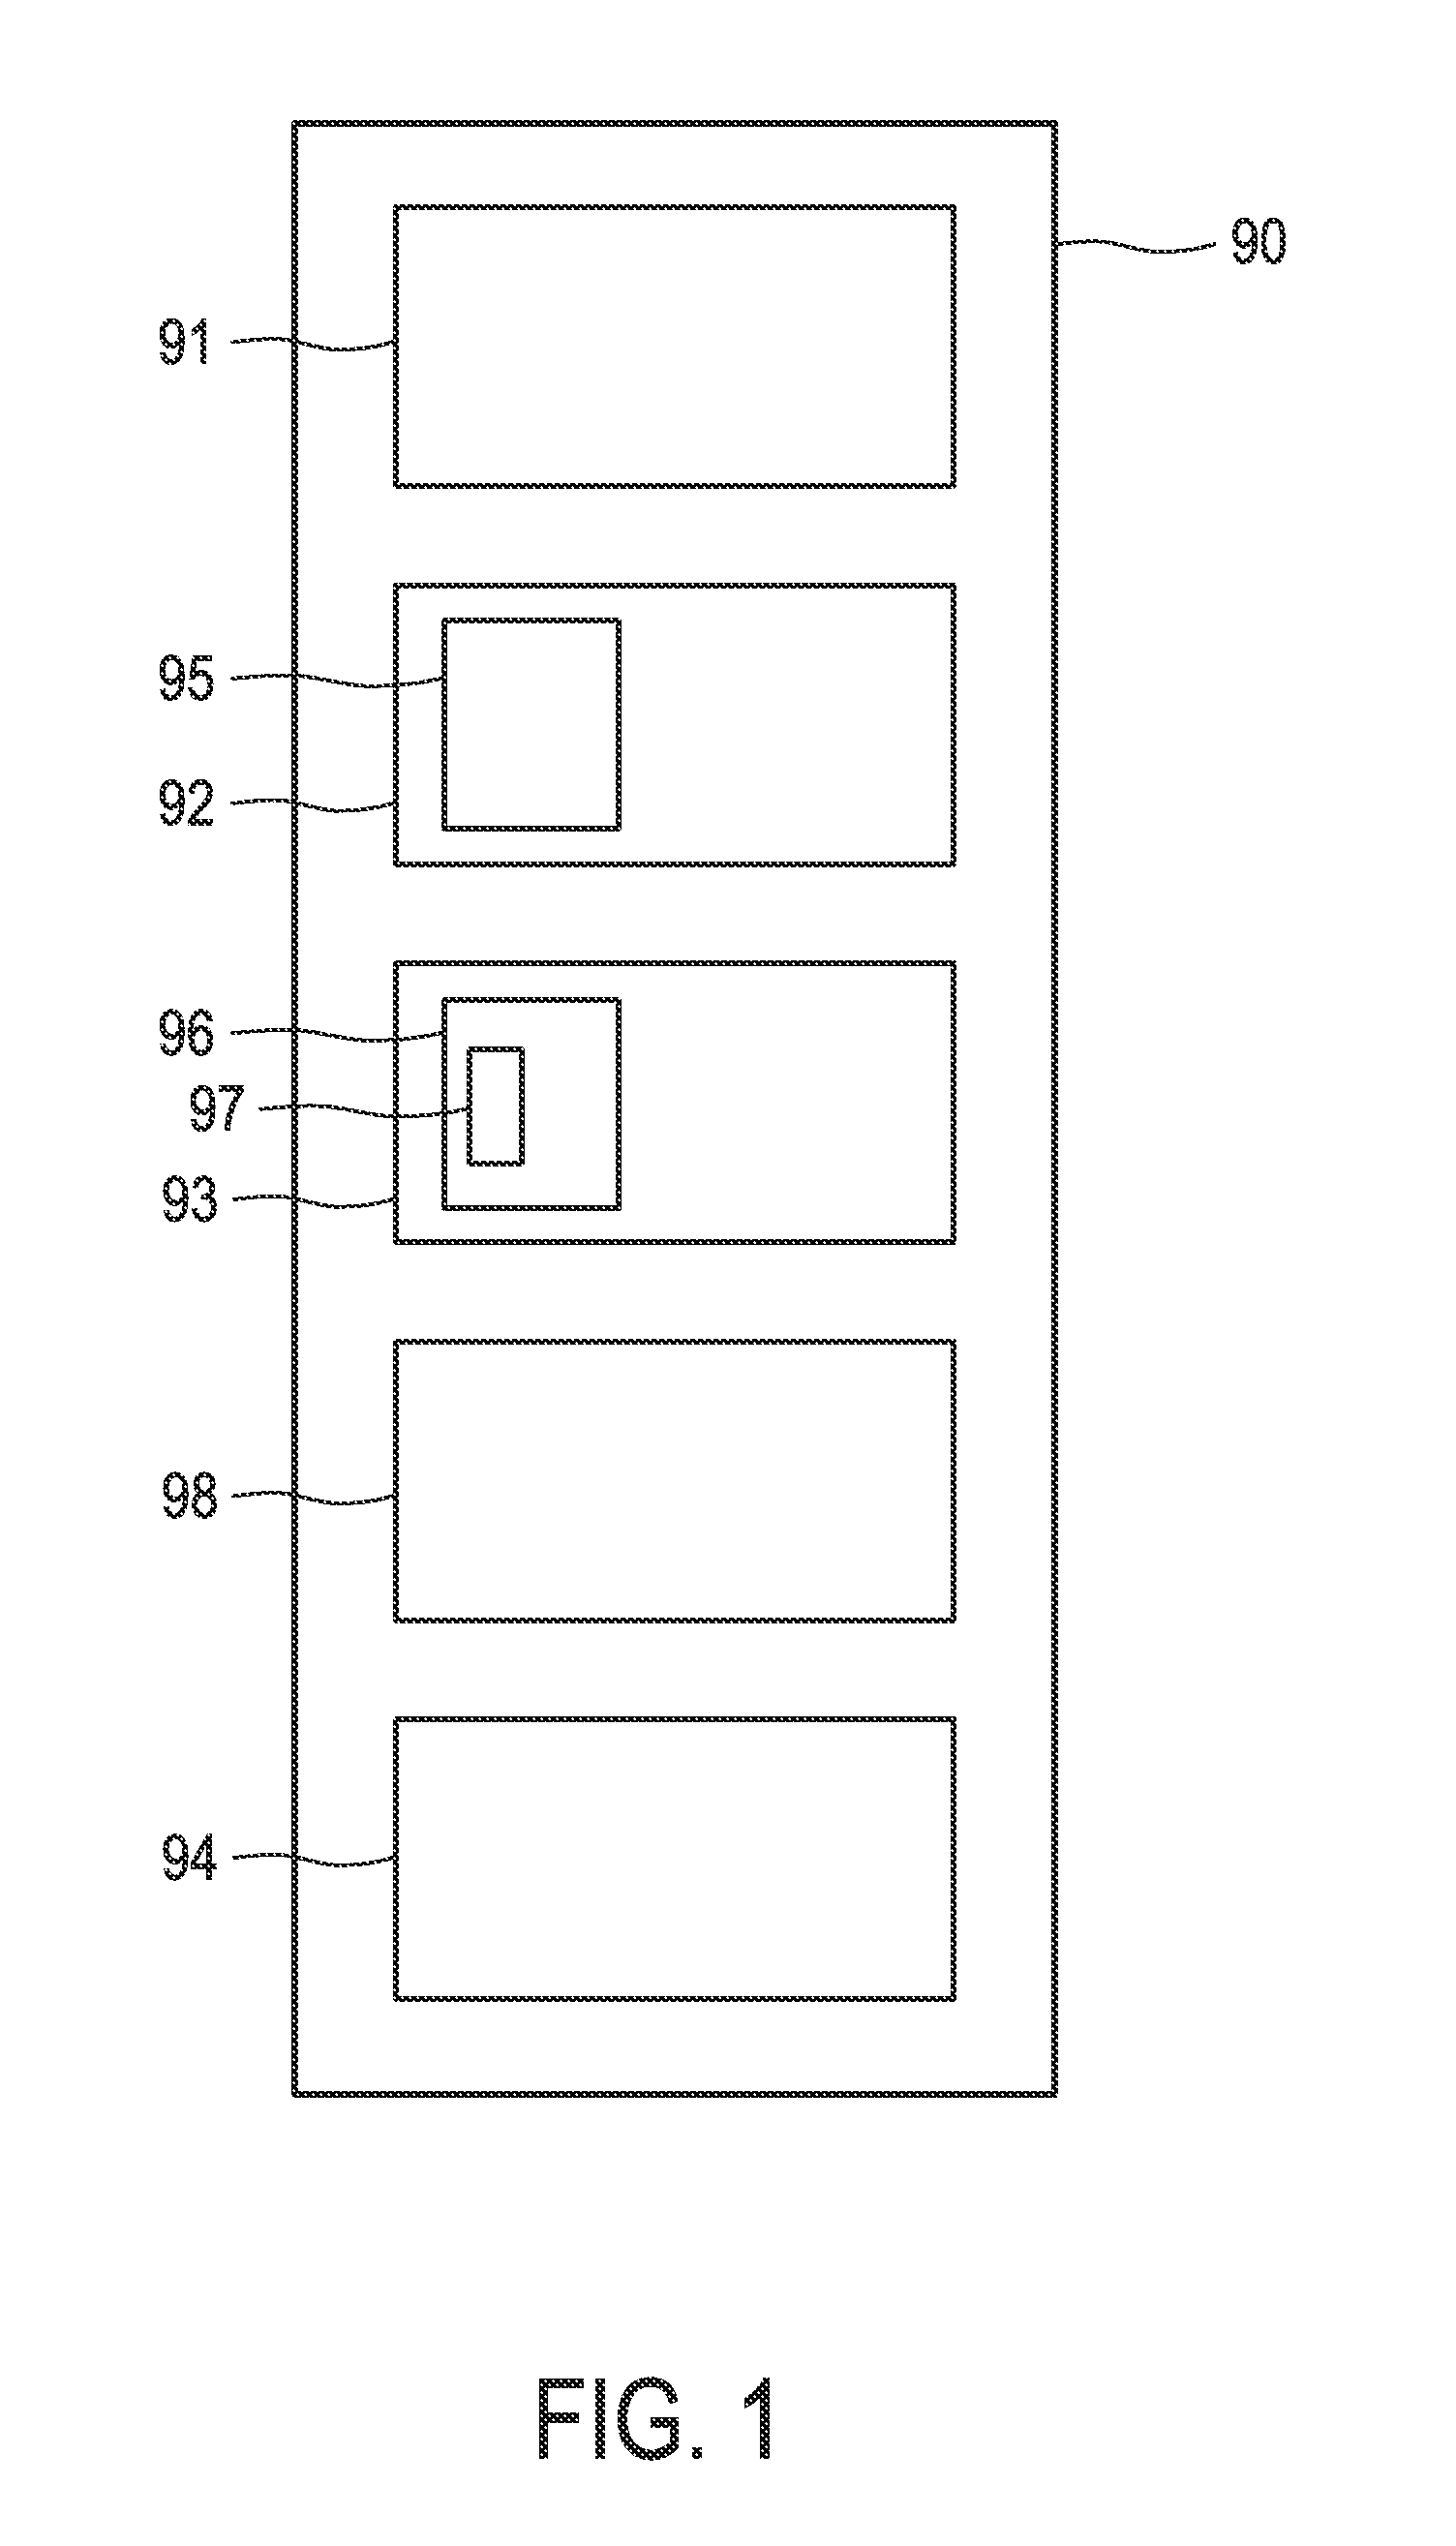 Imaging apparatus for imaging a heart